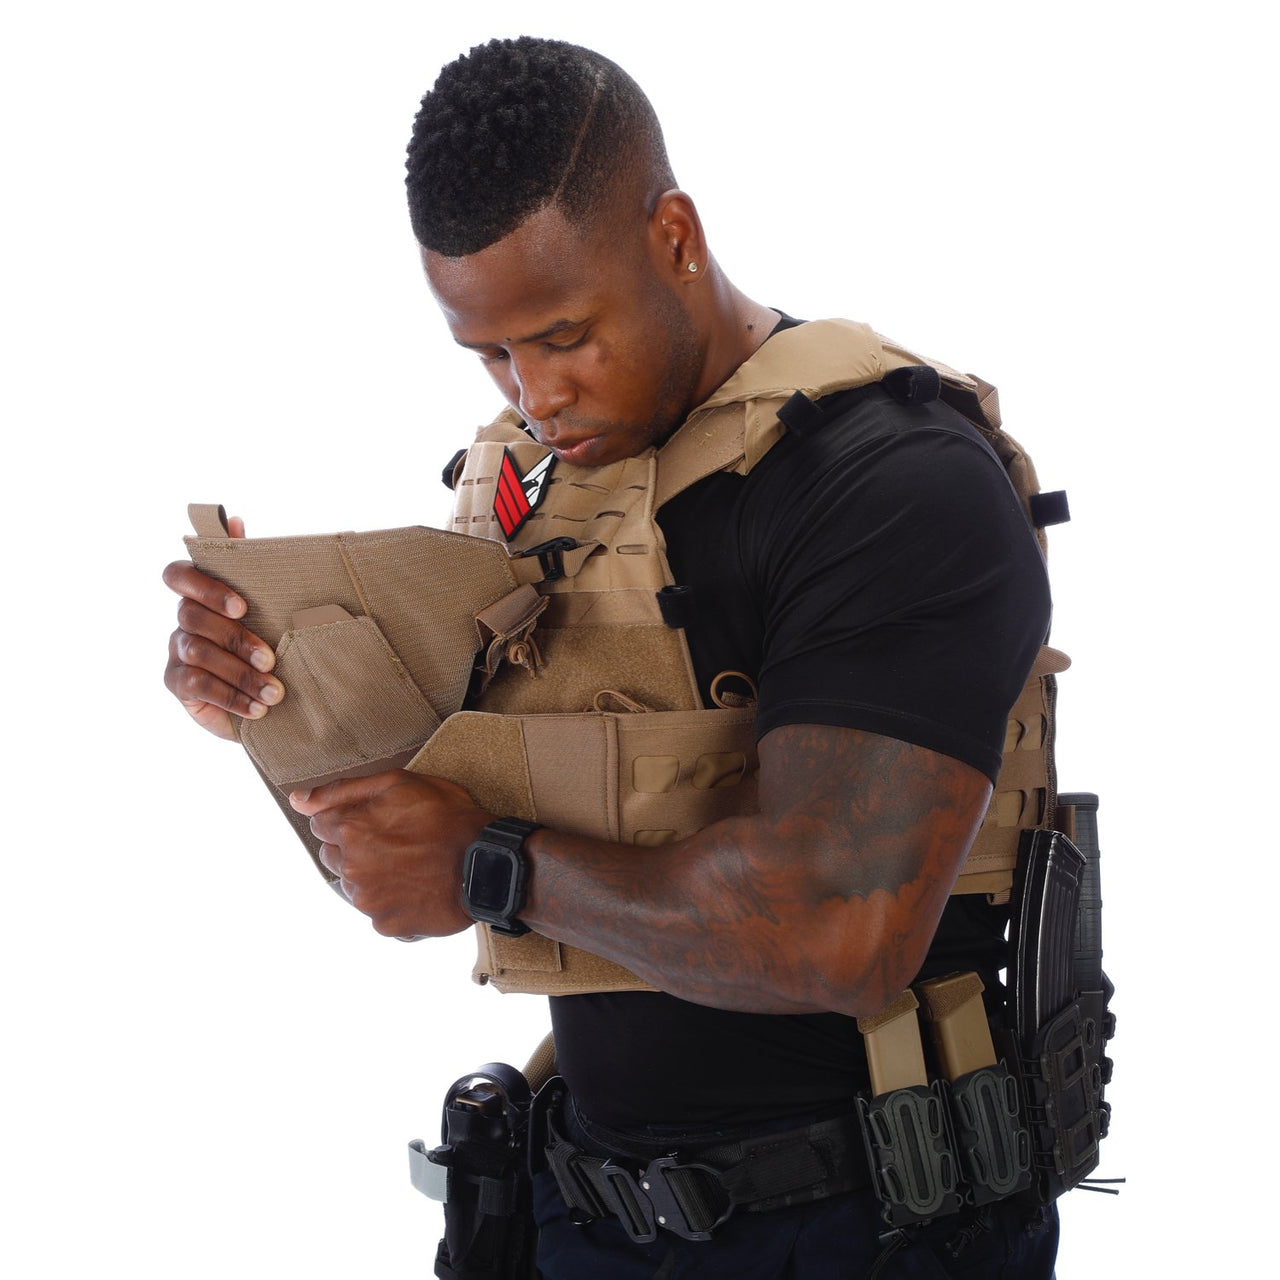 A police officer looking at a Body Armor Direct Expert Plate Carrier made by Body Armor Direct.